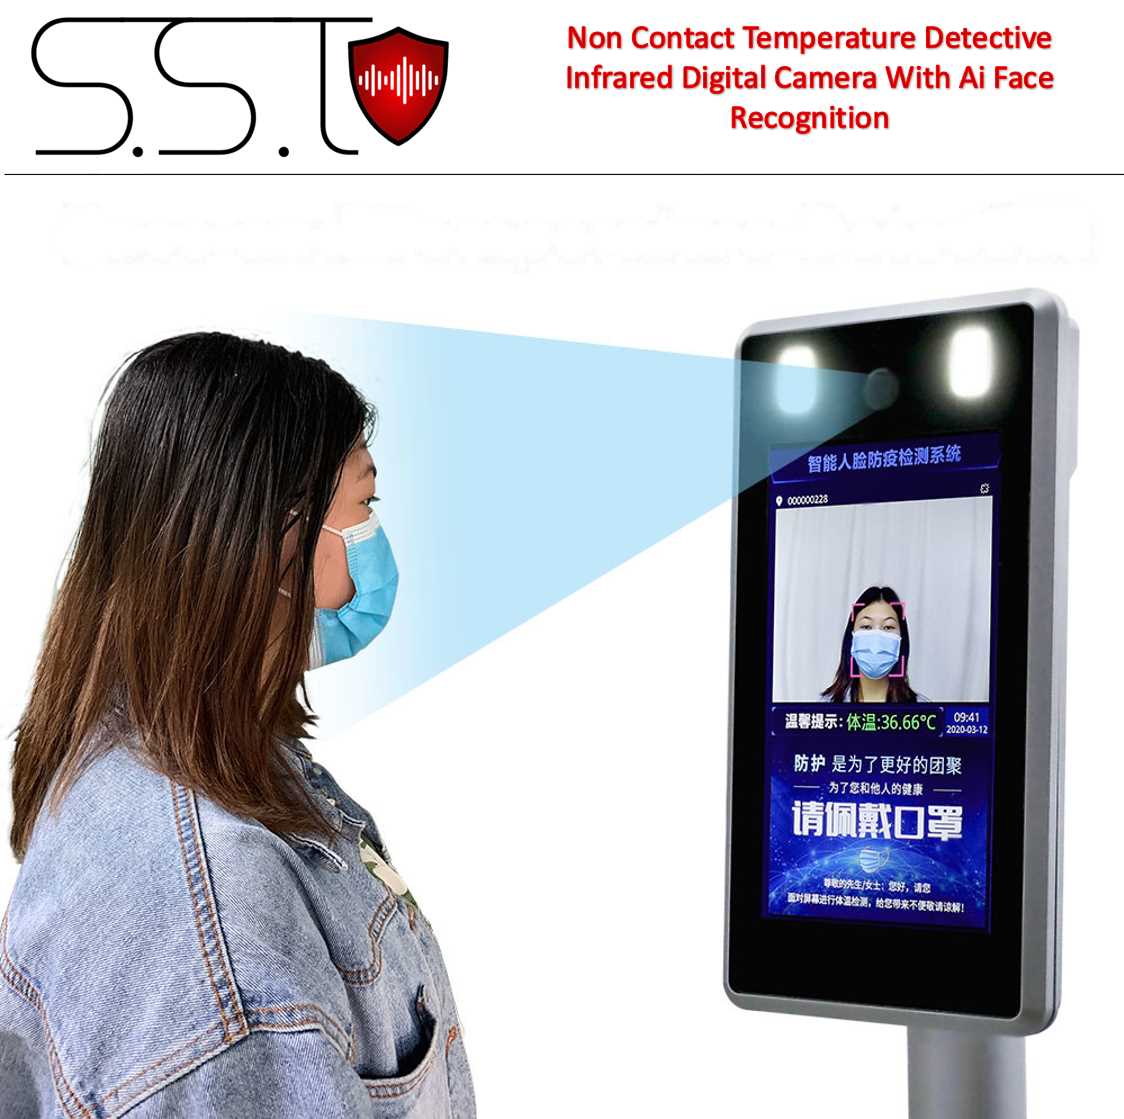 Non Contact Temperature Detective Infrared Digital Camera With Ai Face Recognition For Sale, Sound And Safety Technologies, SST , S&ST , SSTechnologies Sri Lanka.